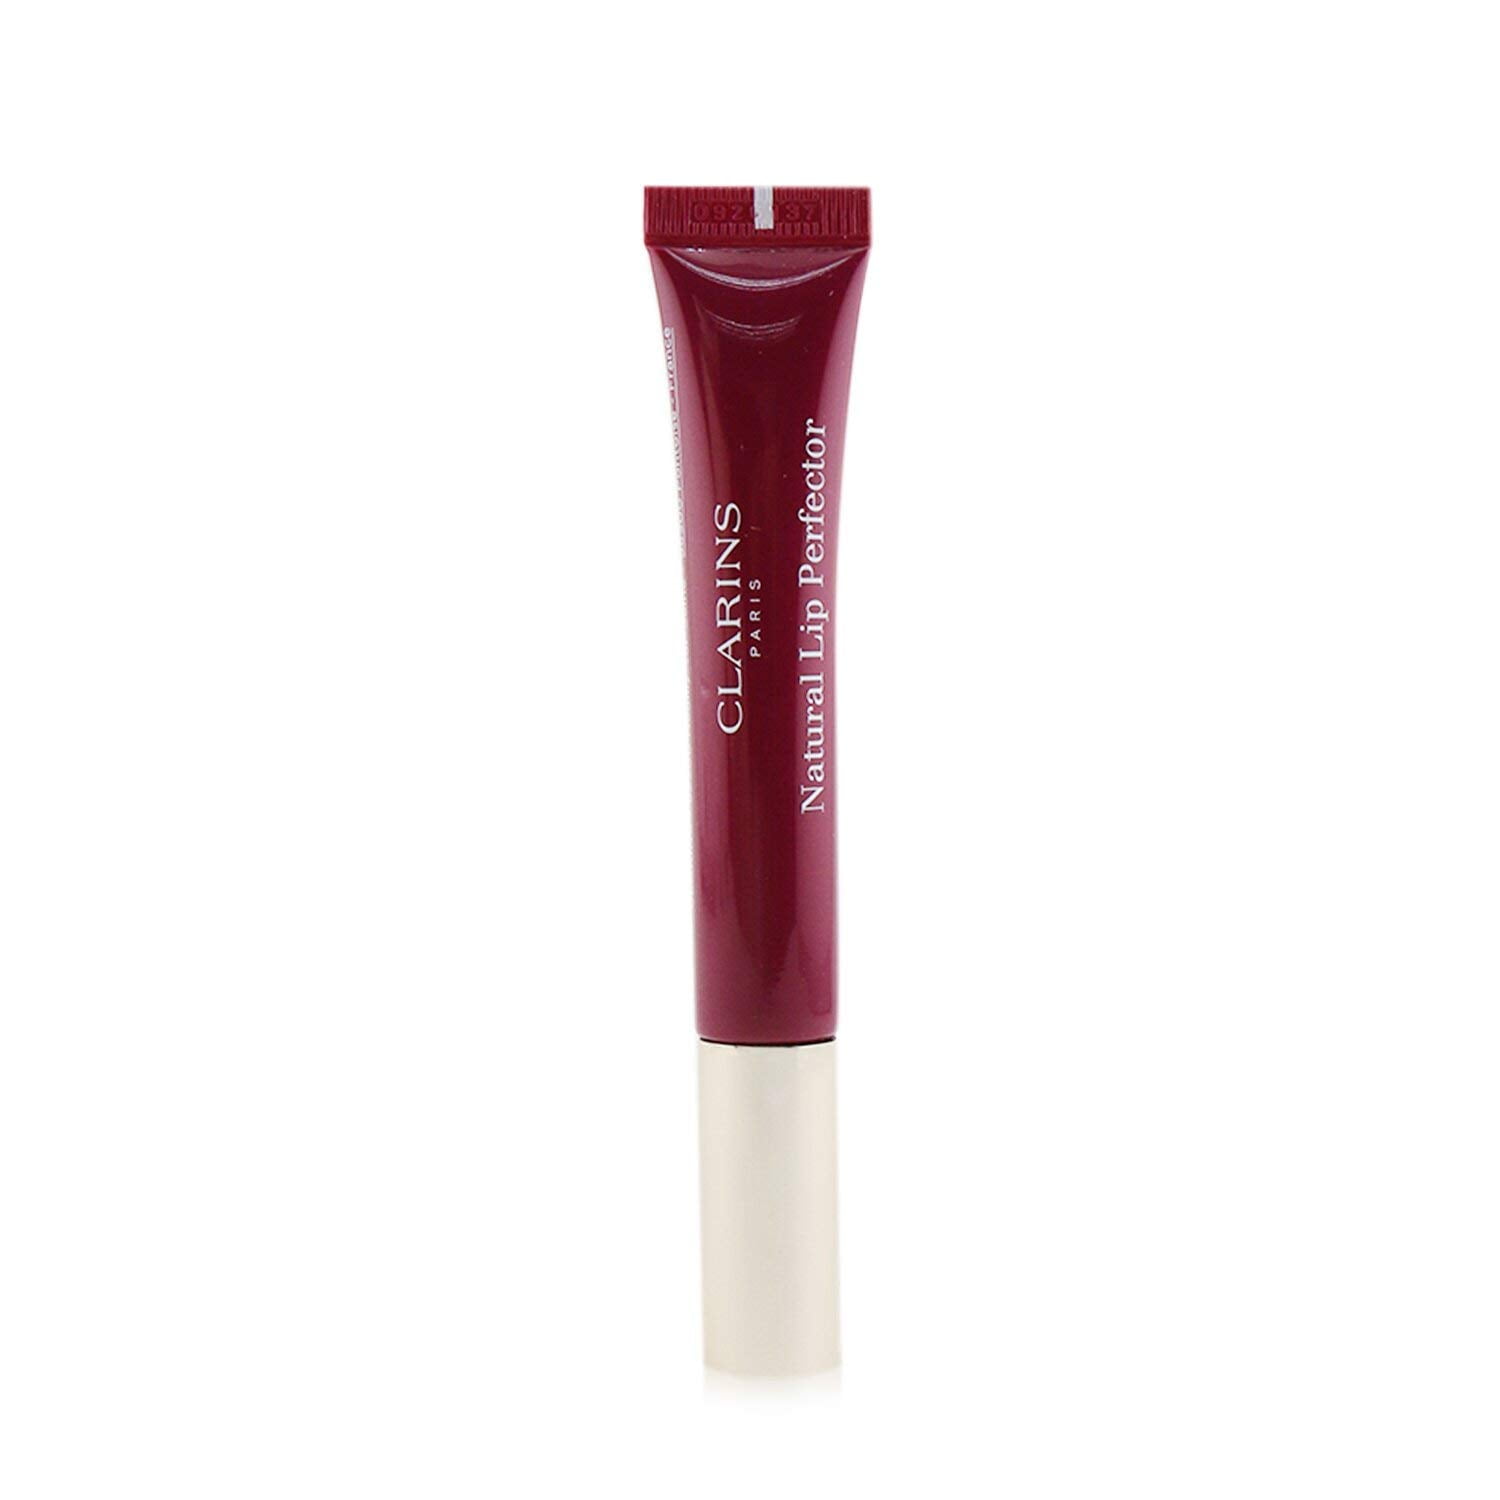 Clarins Eclat Minute Instant Light Natural Lip Perfector 08 Plum Shimmer 0 35 Ounce